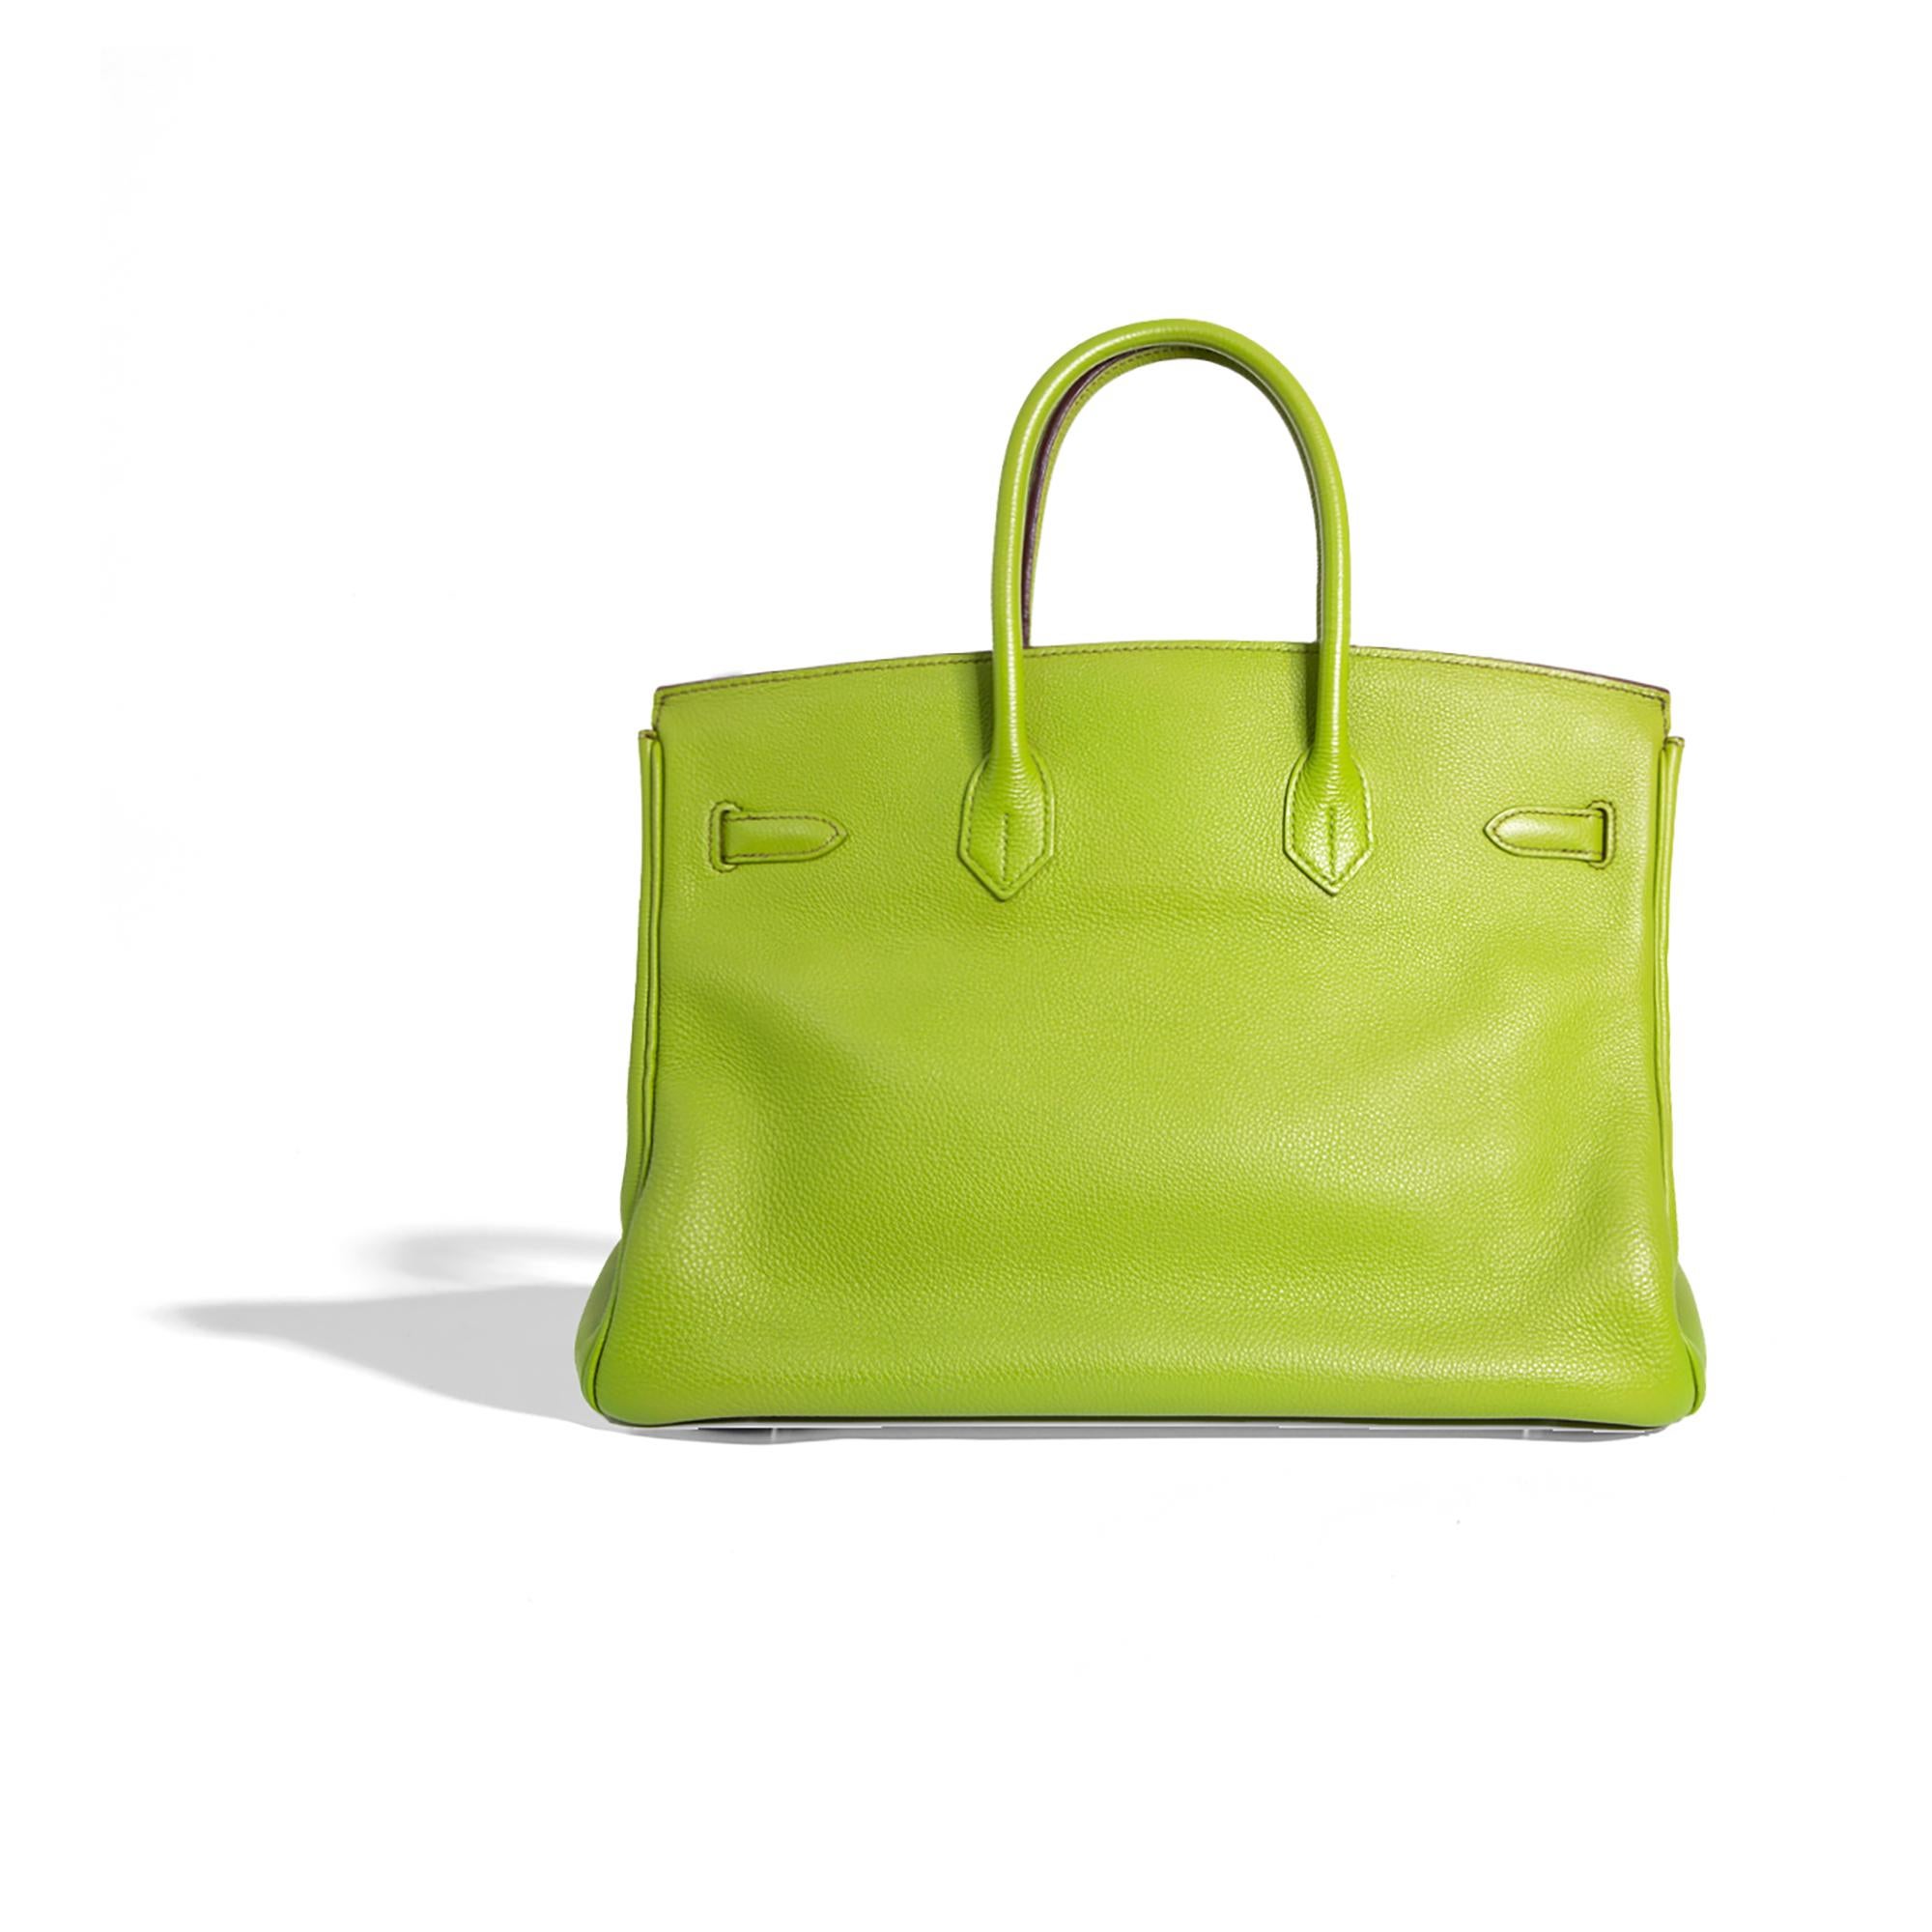 This 35cm Green Togo Birkin with PHW exudes luxuriance and unmistakable style. Crafted in 2007 with vibrant anise green togo leather, this collector's item features palladium hardware for a subtly sophisticated finish. An exquisite addition to any